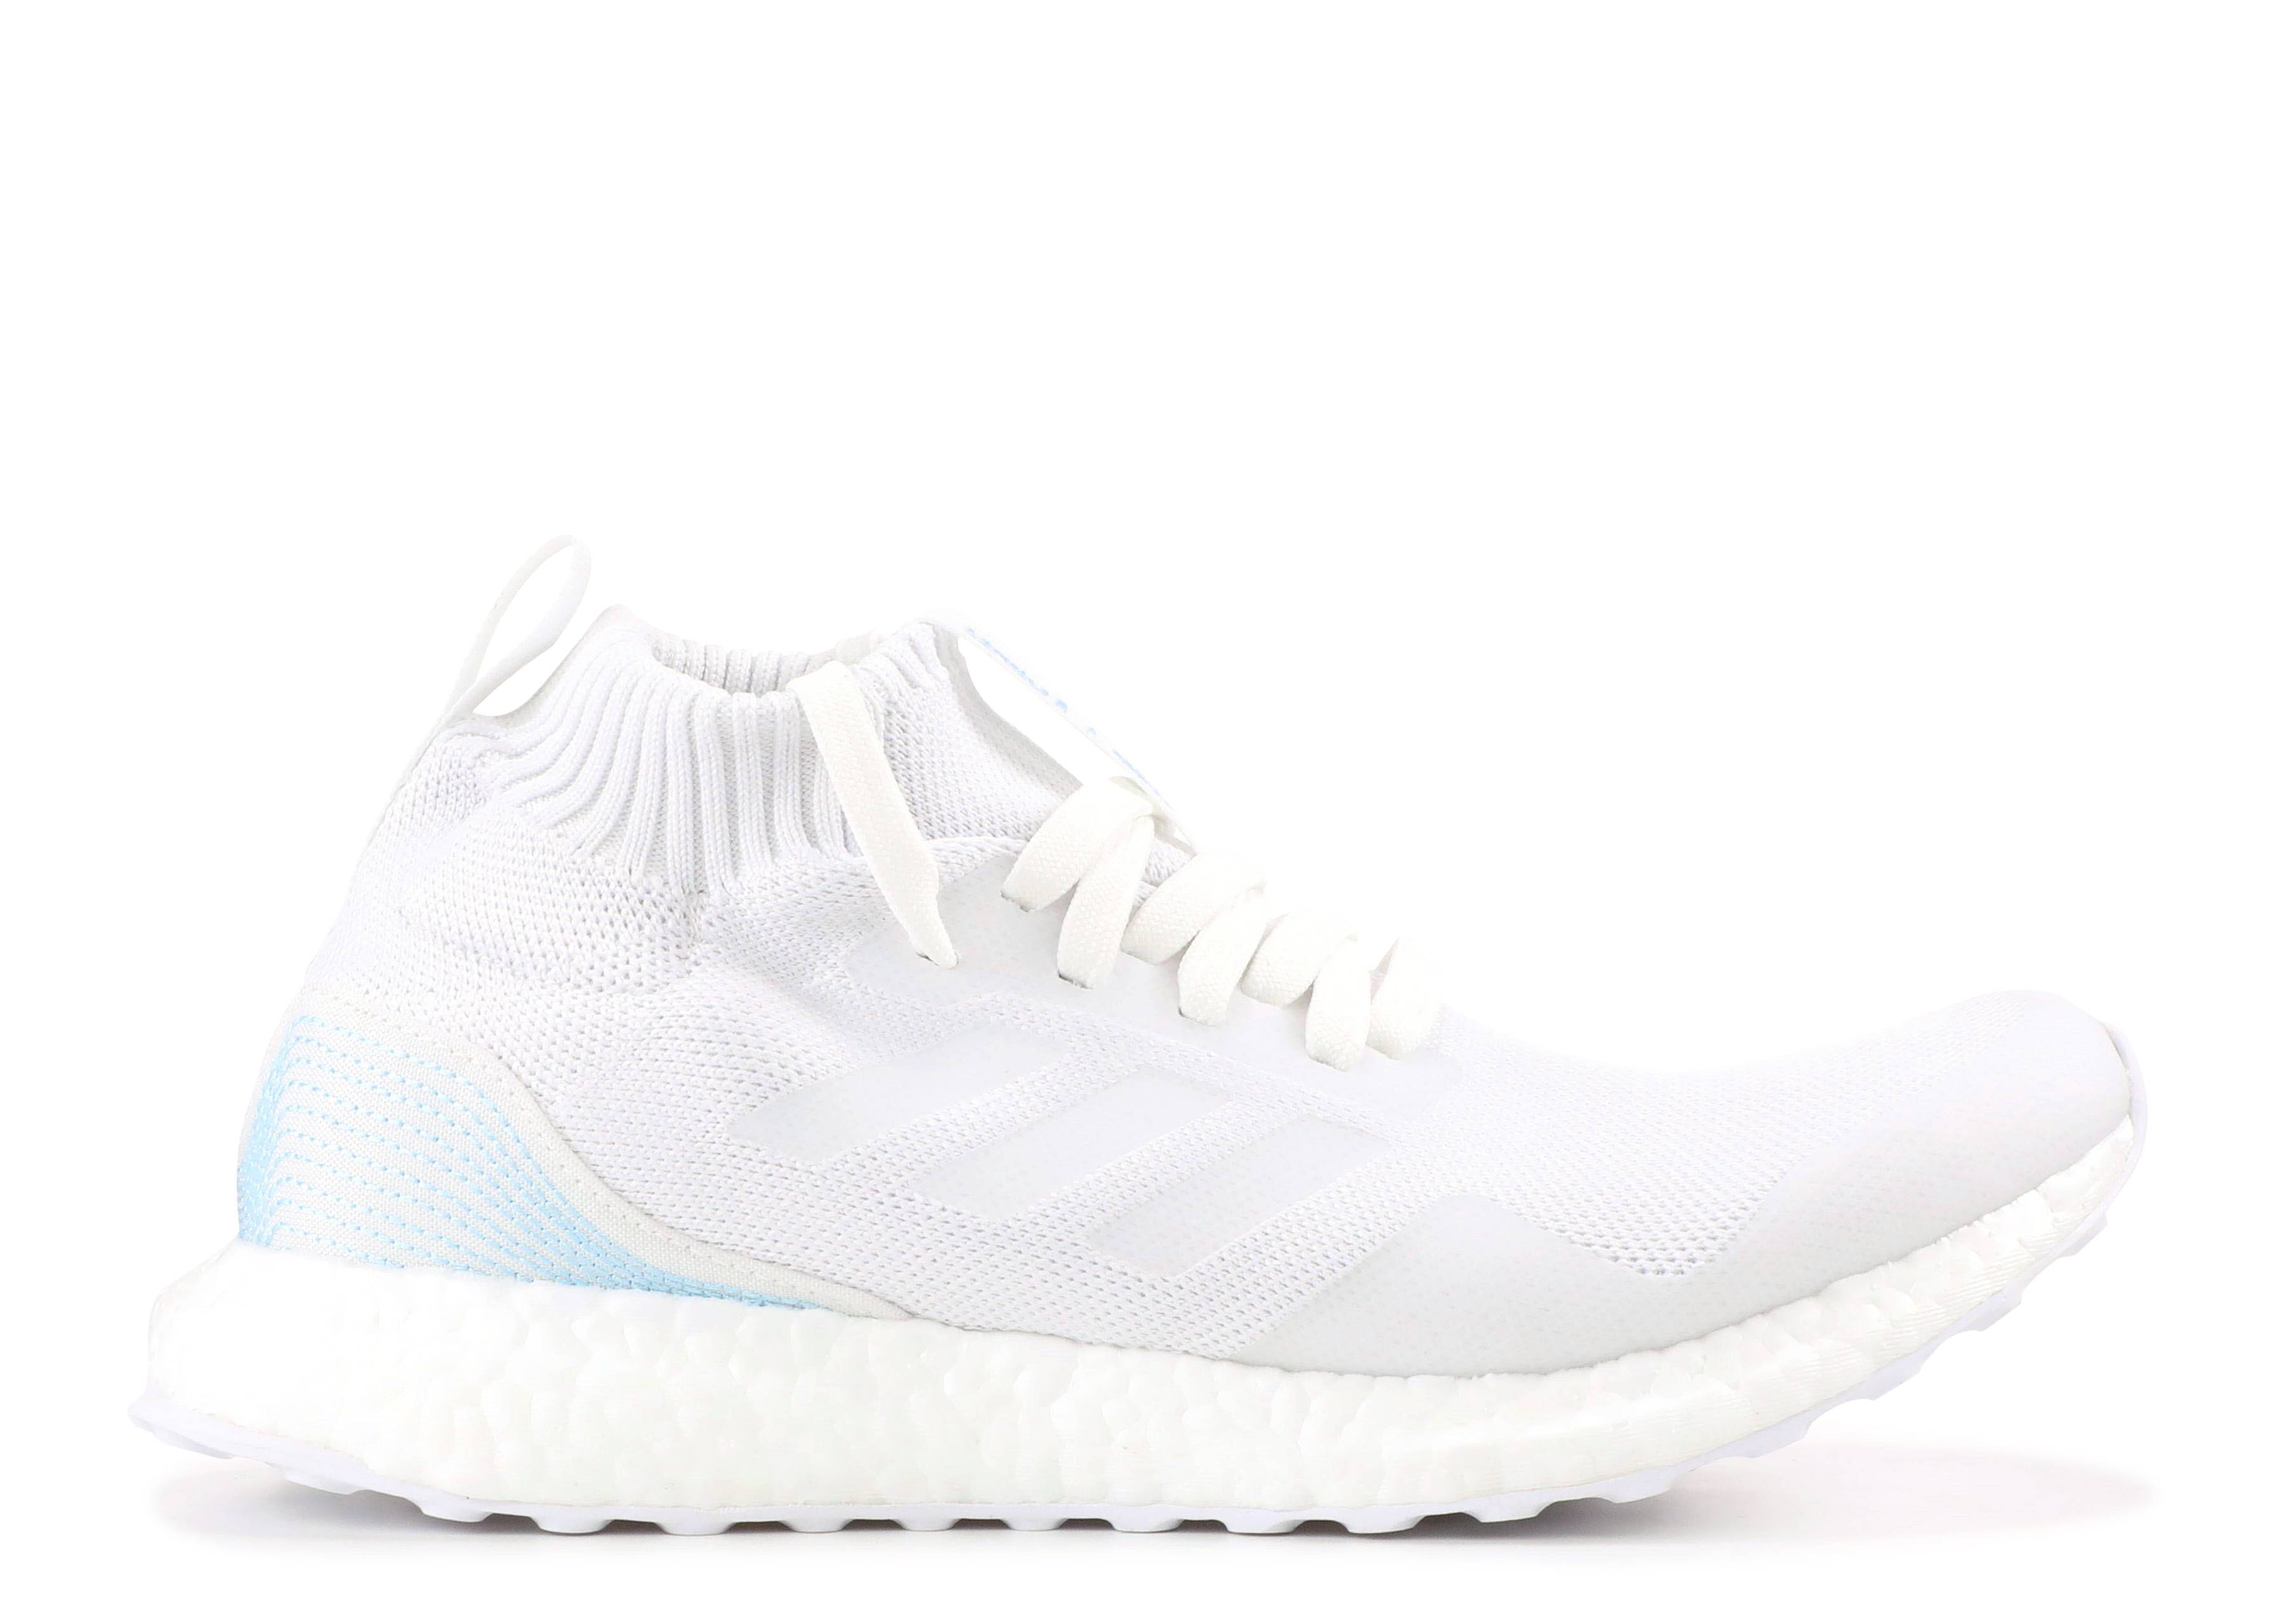 Parley x UltraBoost Mid 'White'